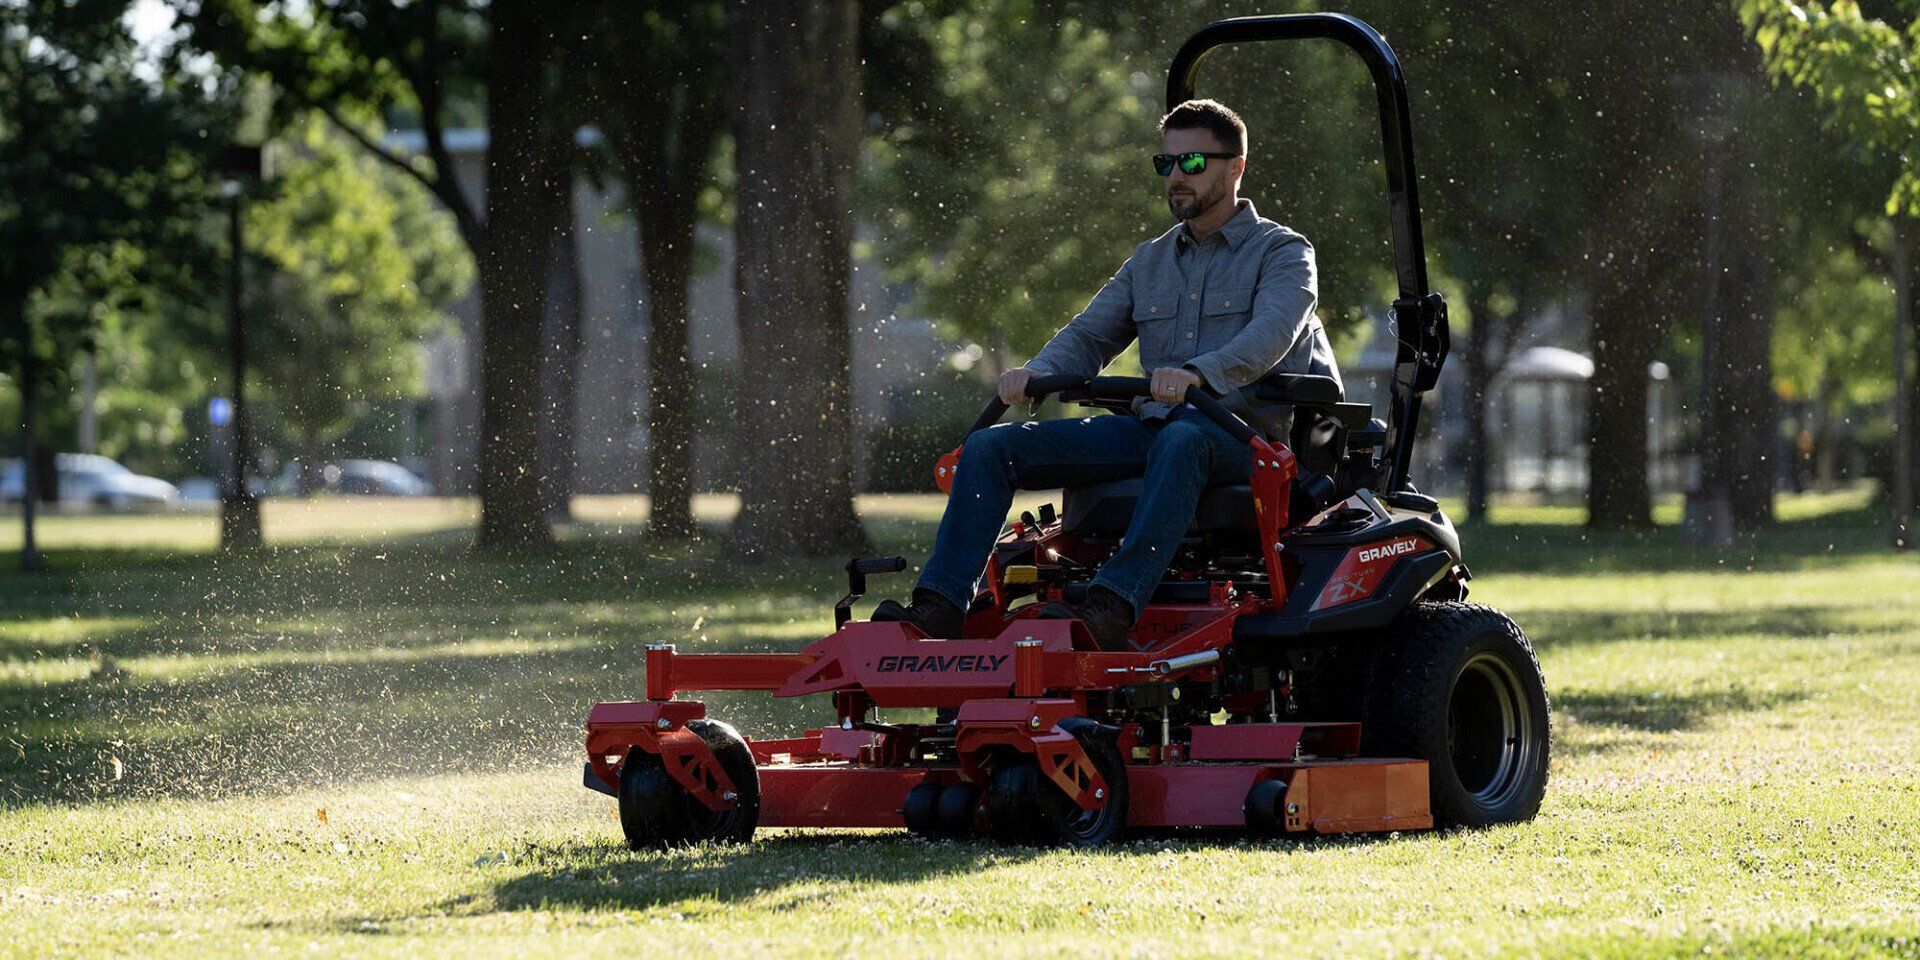 A man is riding a gravely  mower in a park.